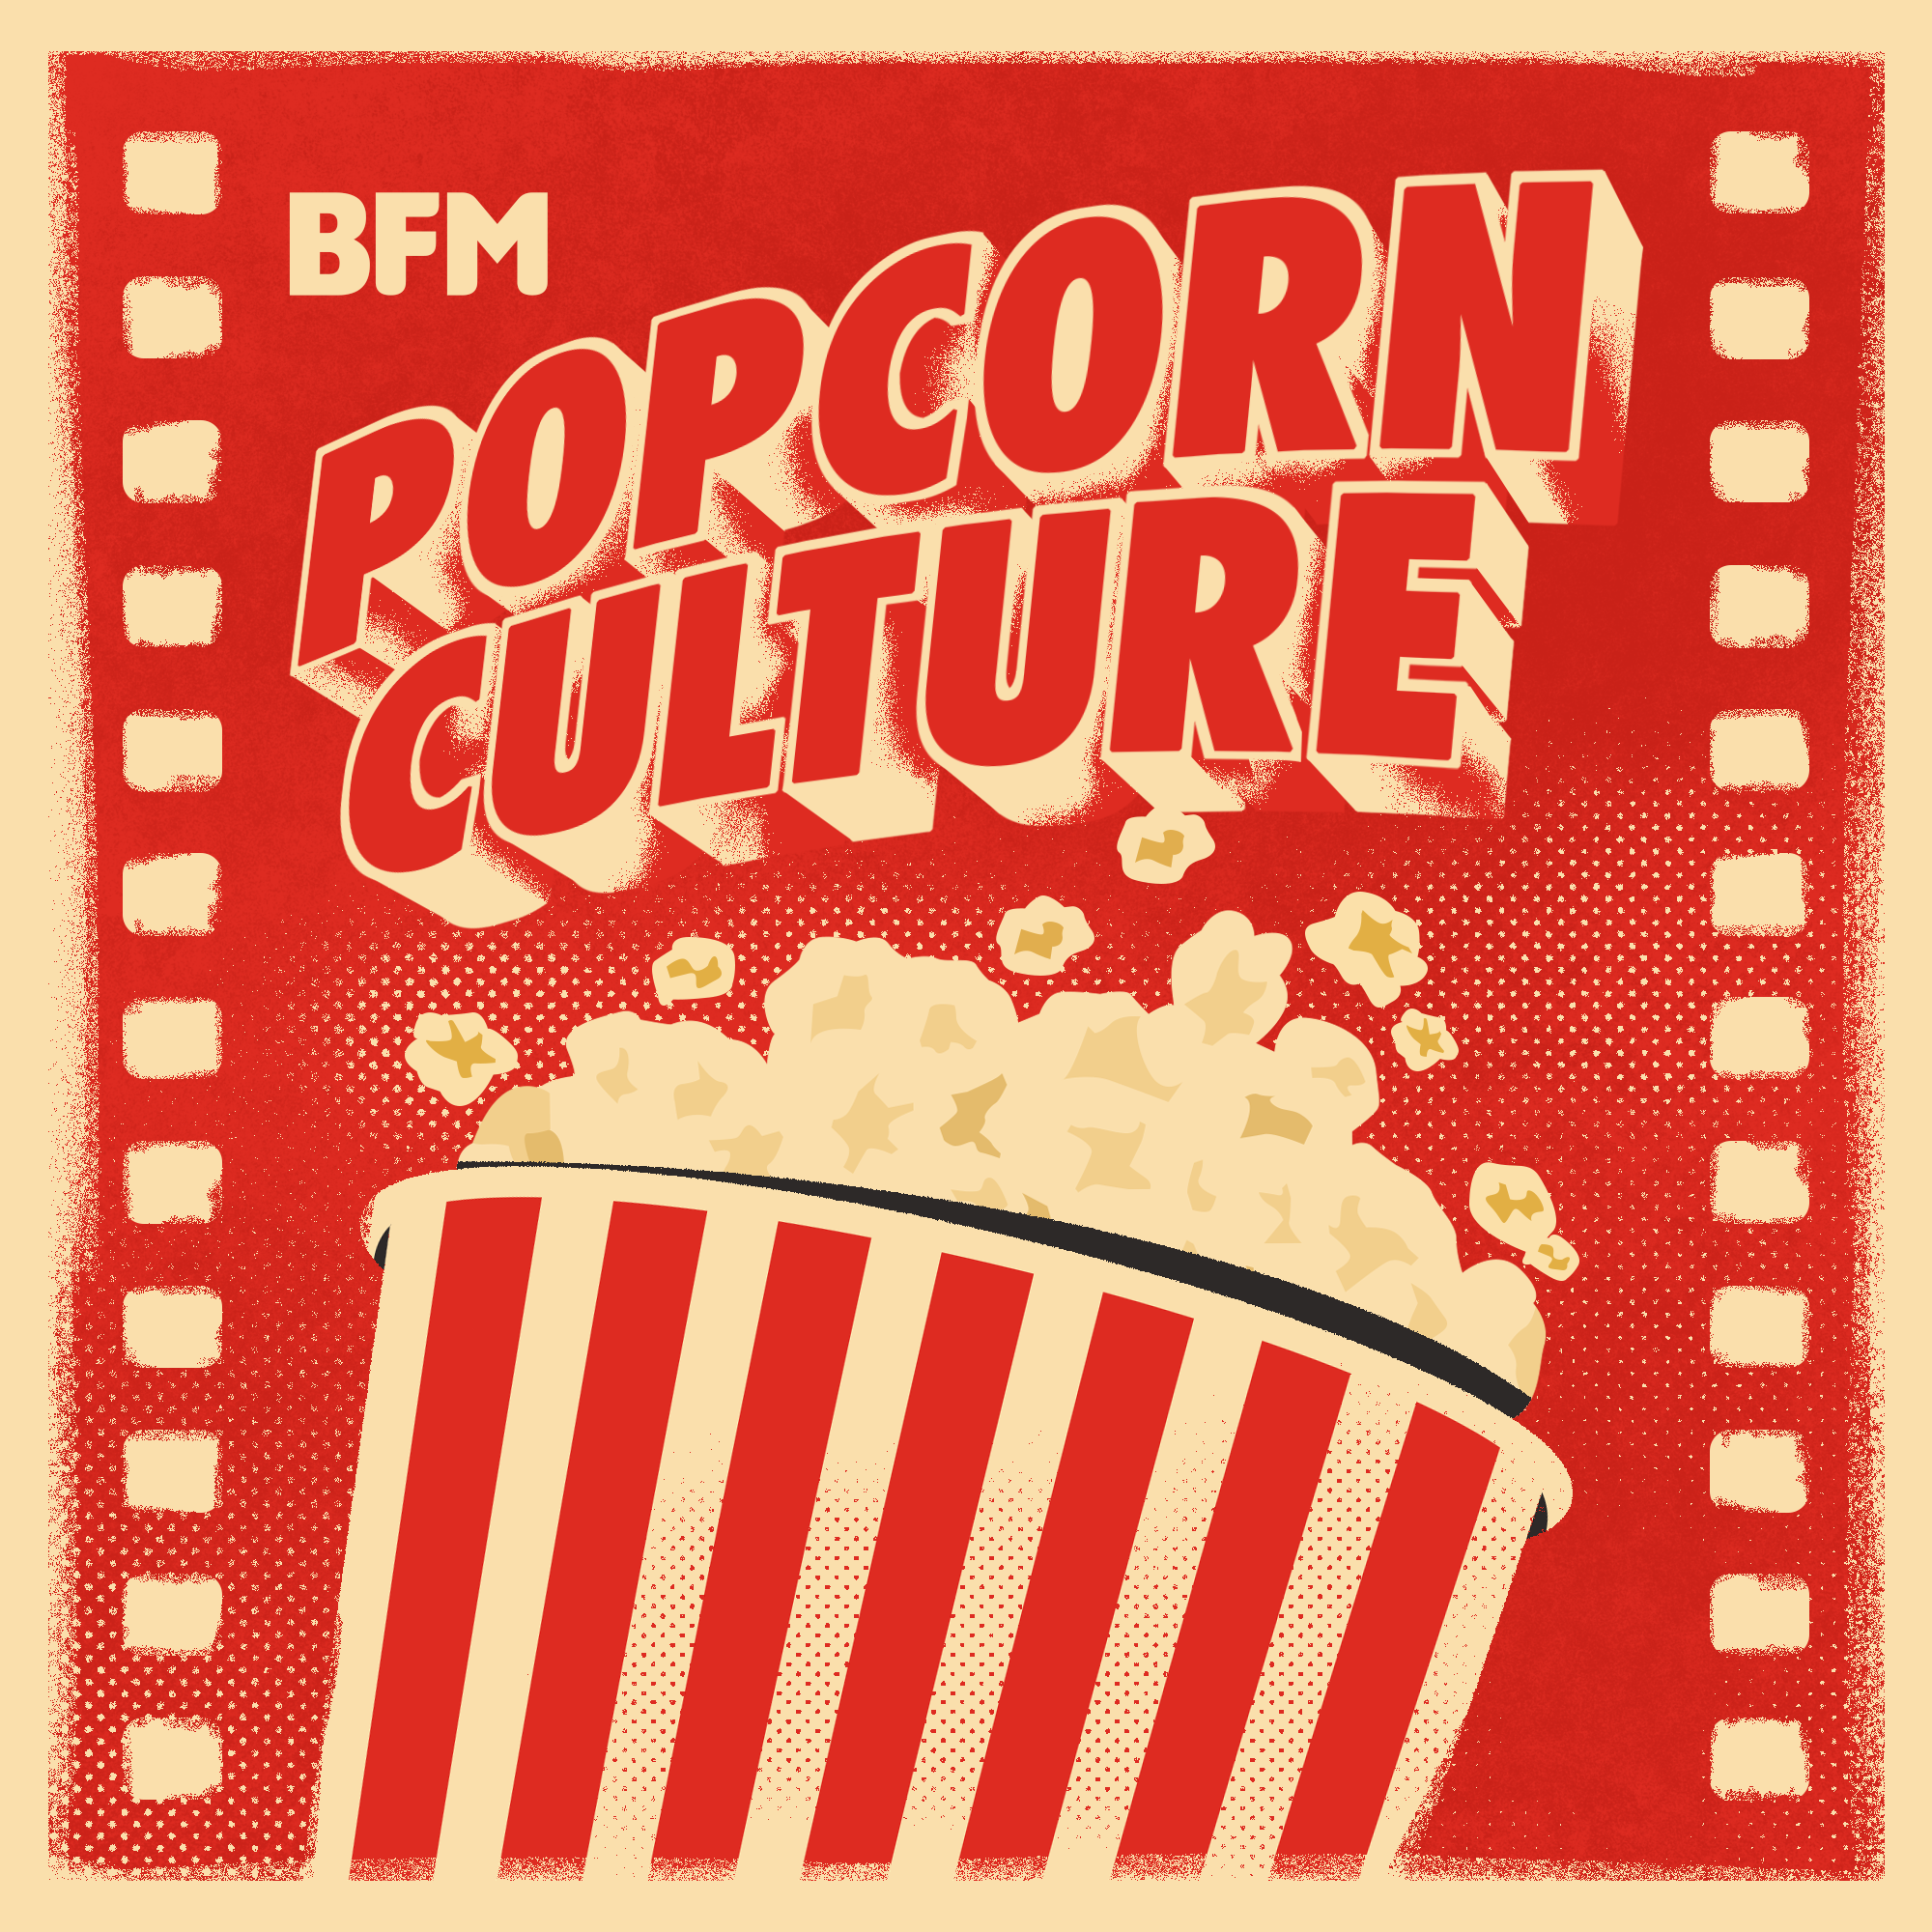 Popcorn Culture - Review: American-Born Chinese